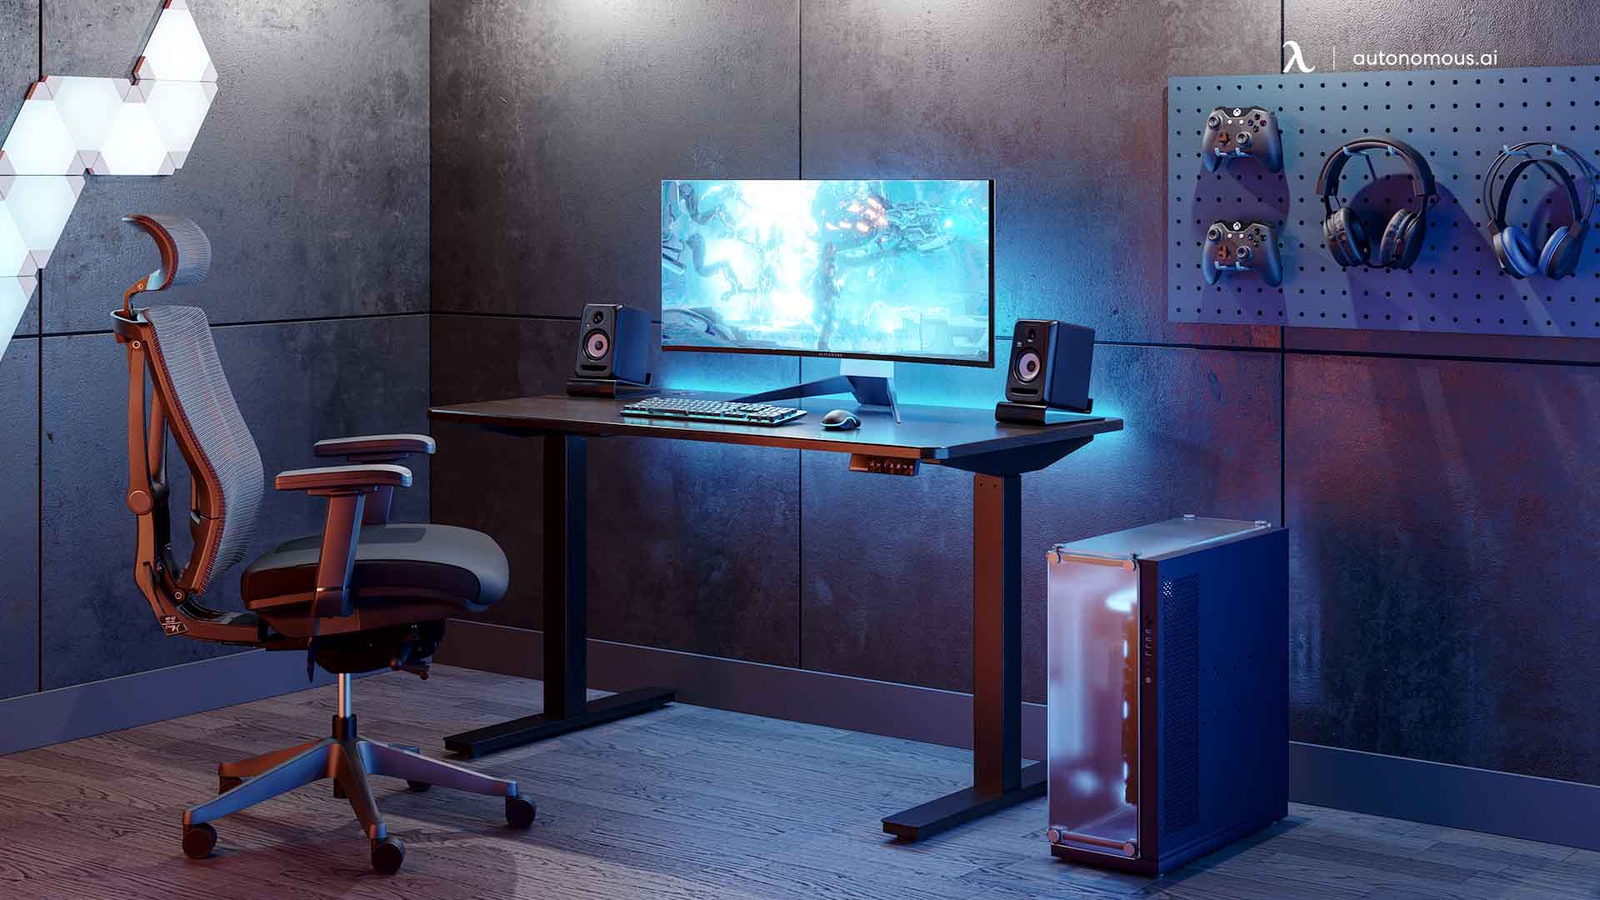 Looking for a 70–inch Gaming Desk? Here are 6 Options